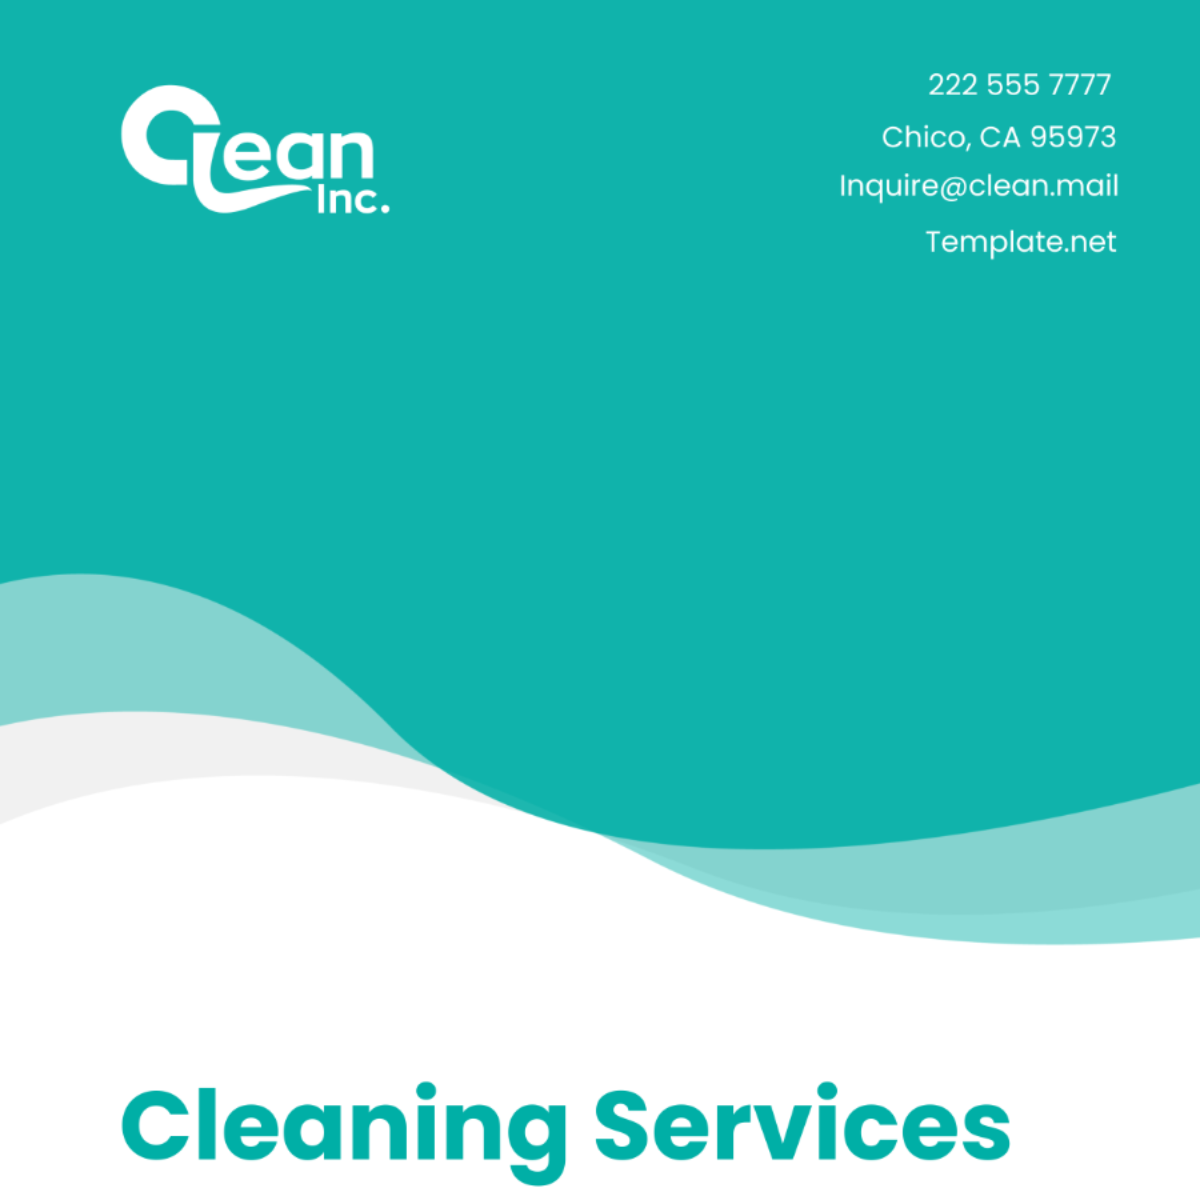 Cleaning Services Operations Manager Job Contract Template